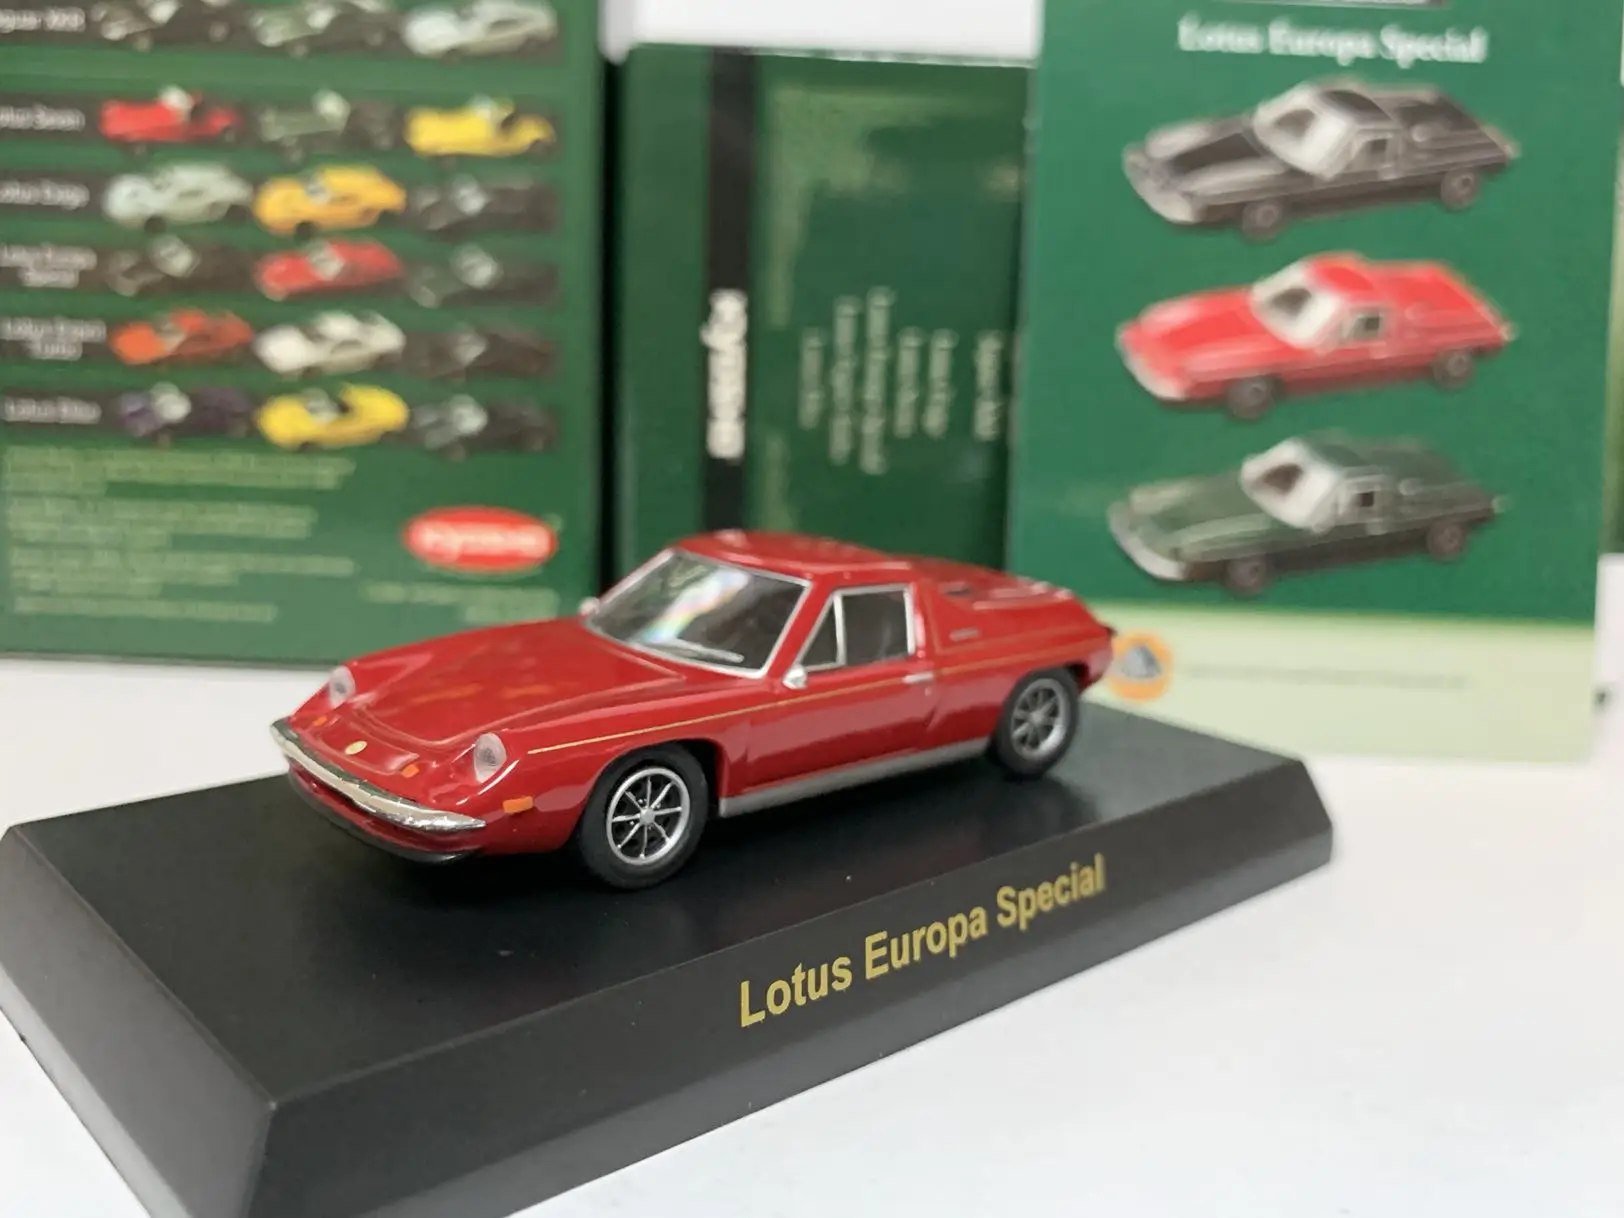 

1/64 KYOSHO Lotus Europa Special Collection of die-cast alloy car decoration model toys